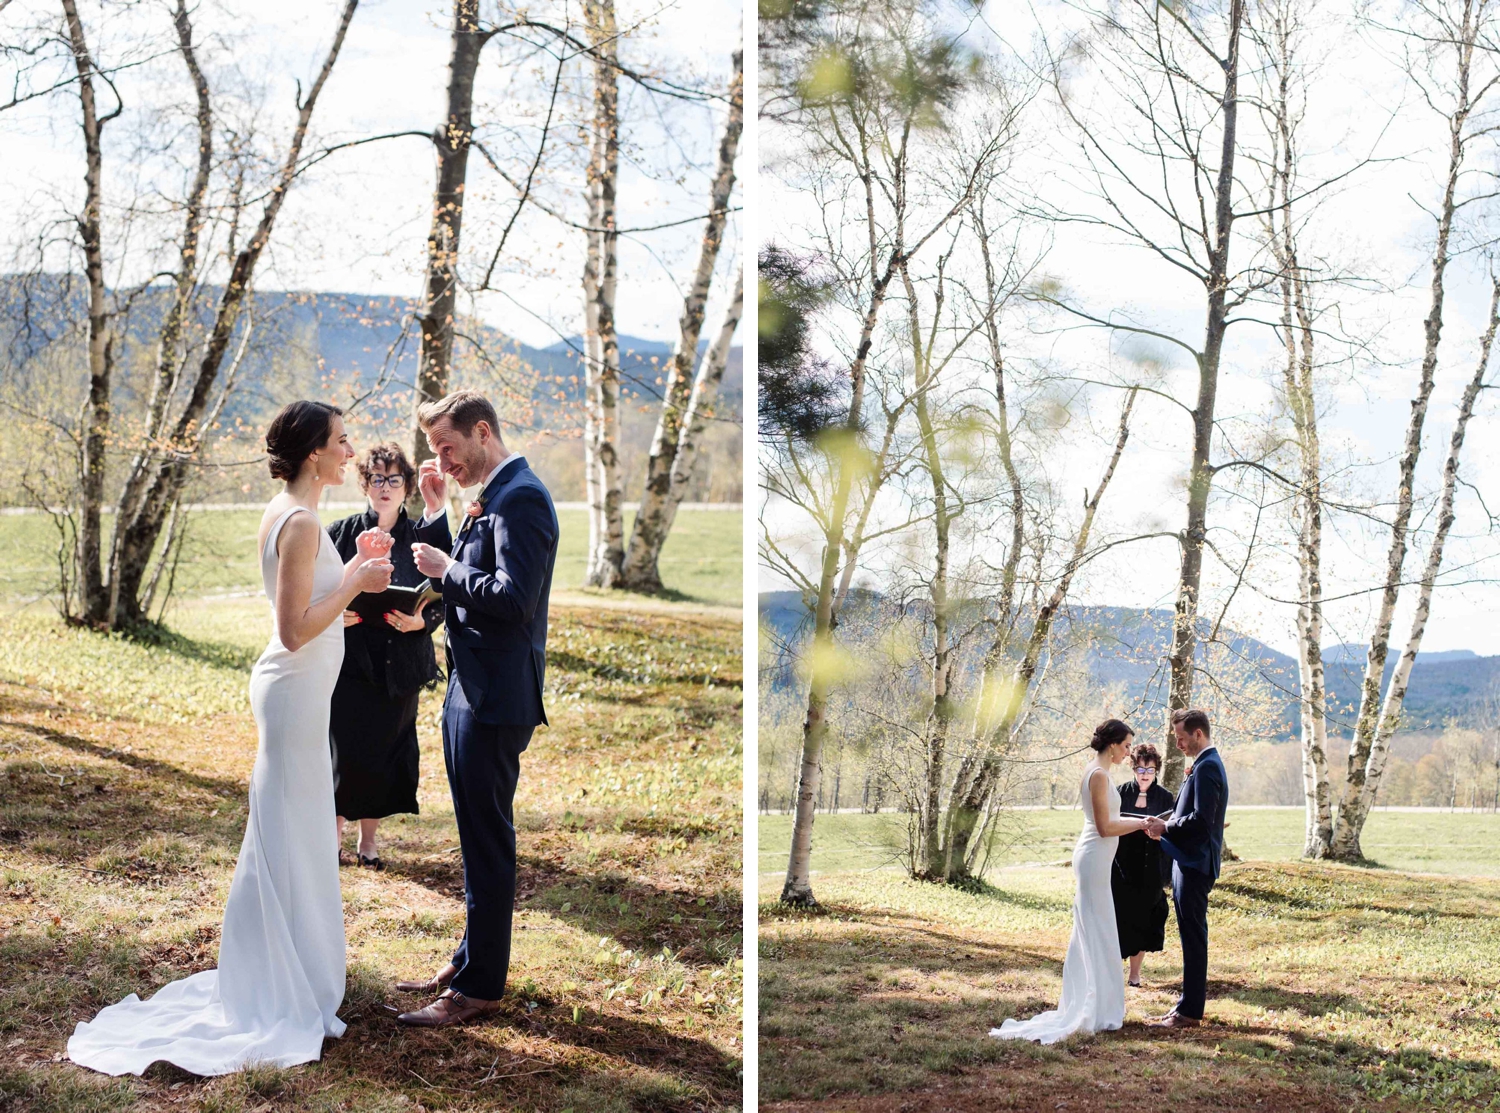 Spring wedding at Trapp Family Lodge